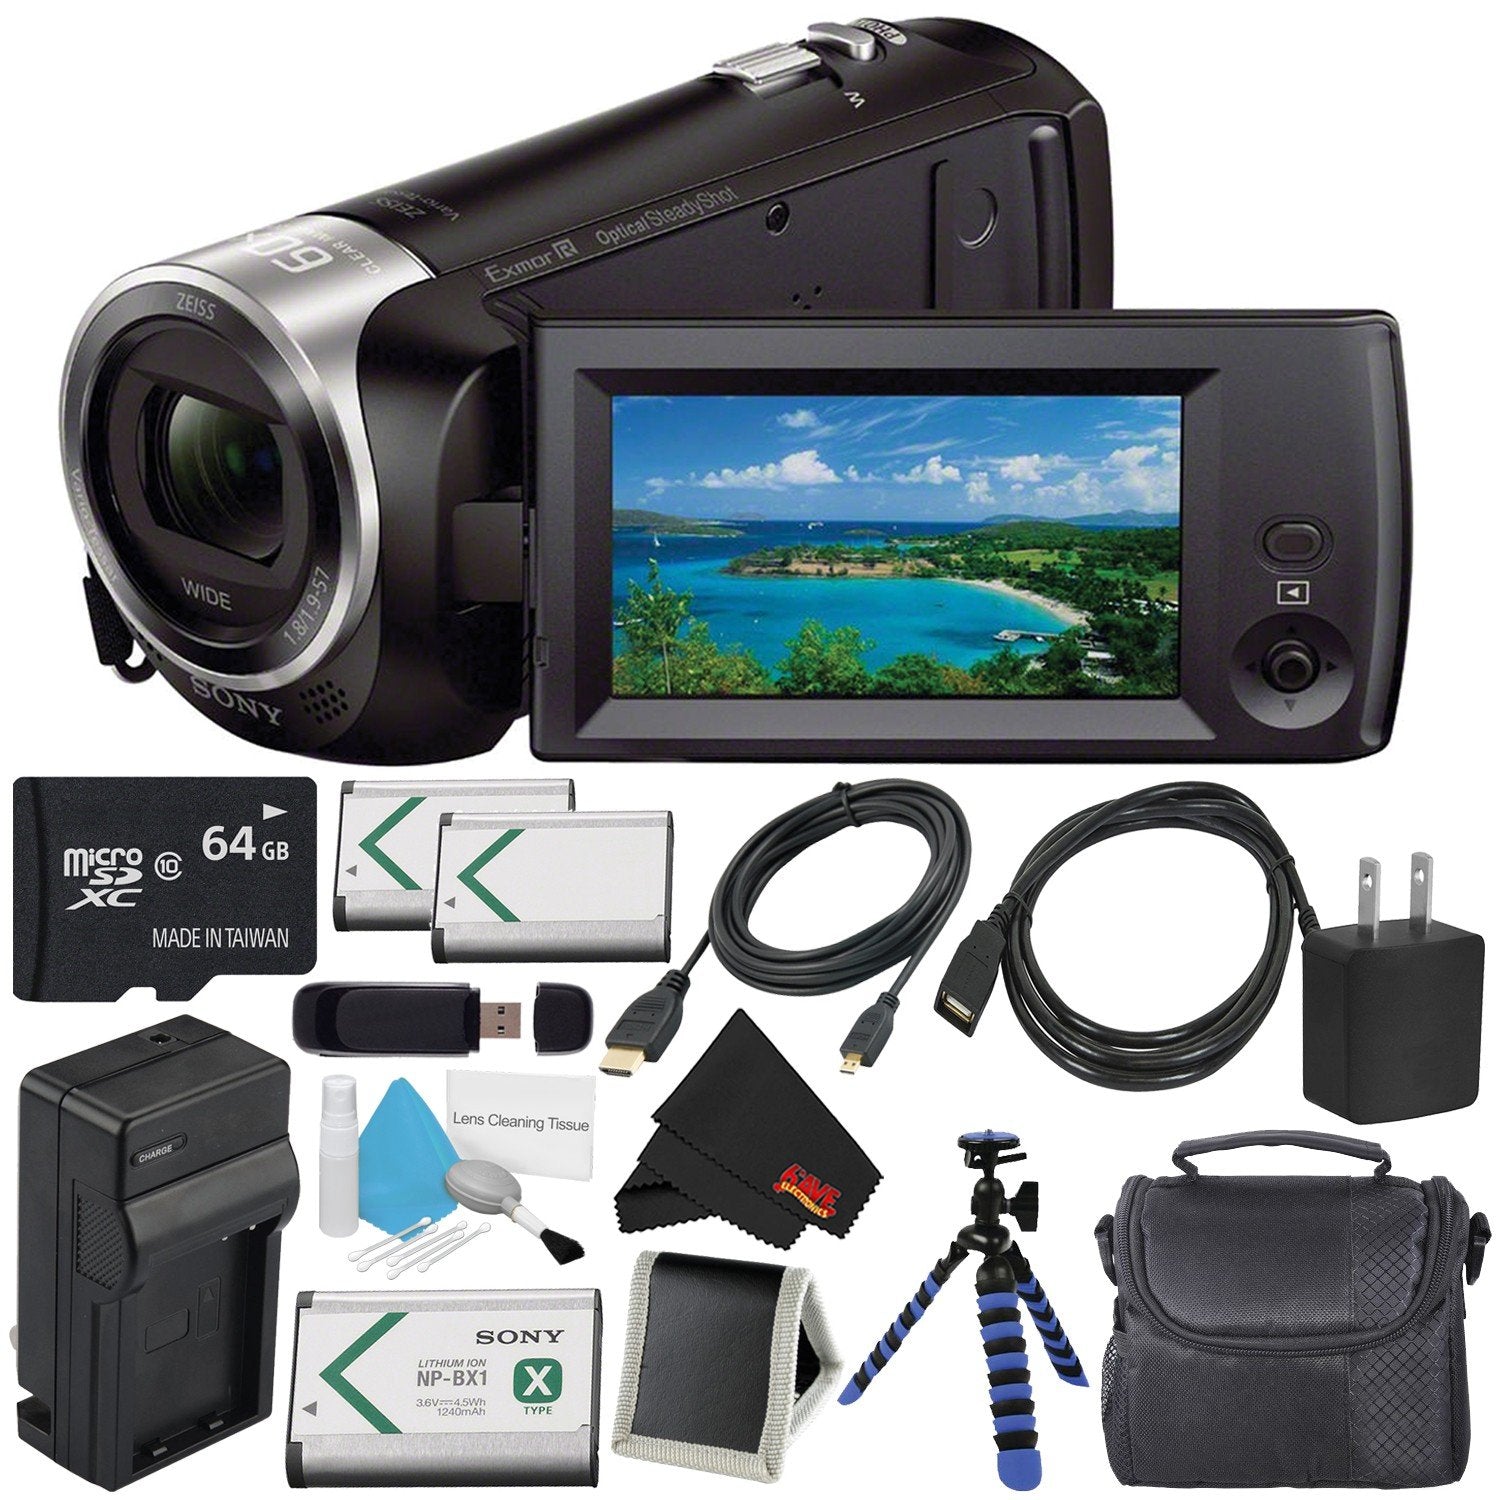 Sony HDR-CX405 HD Handycam HDRCX405/B + 64GB microSDXC + Carrying Case + Deluxe Cleaning Kit + Microfiber Cloth Bundle